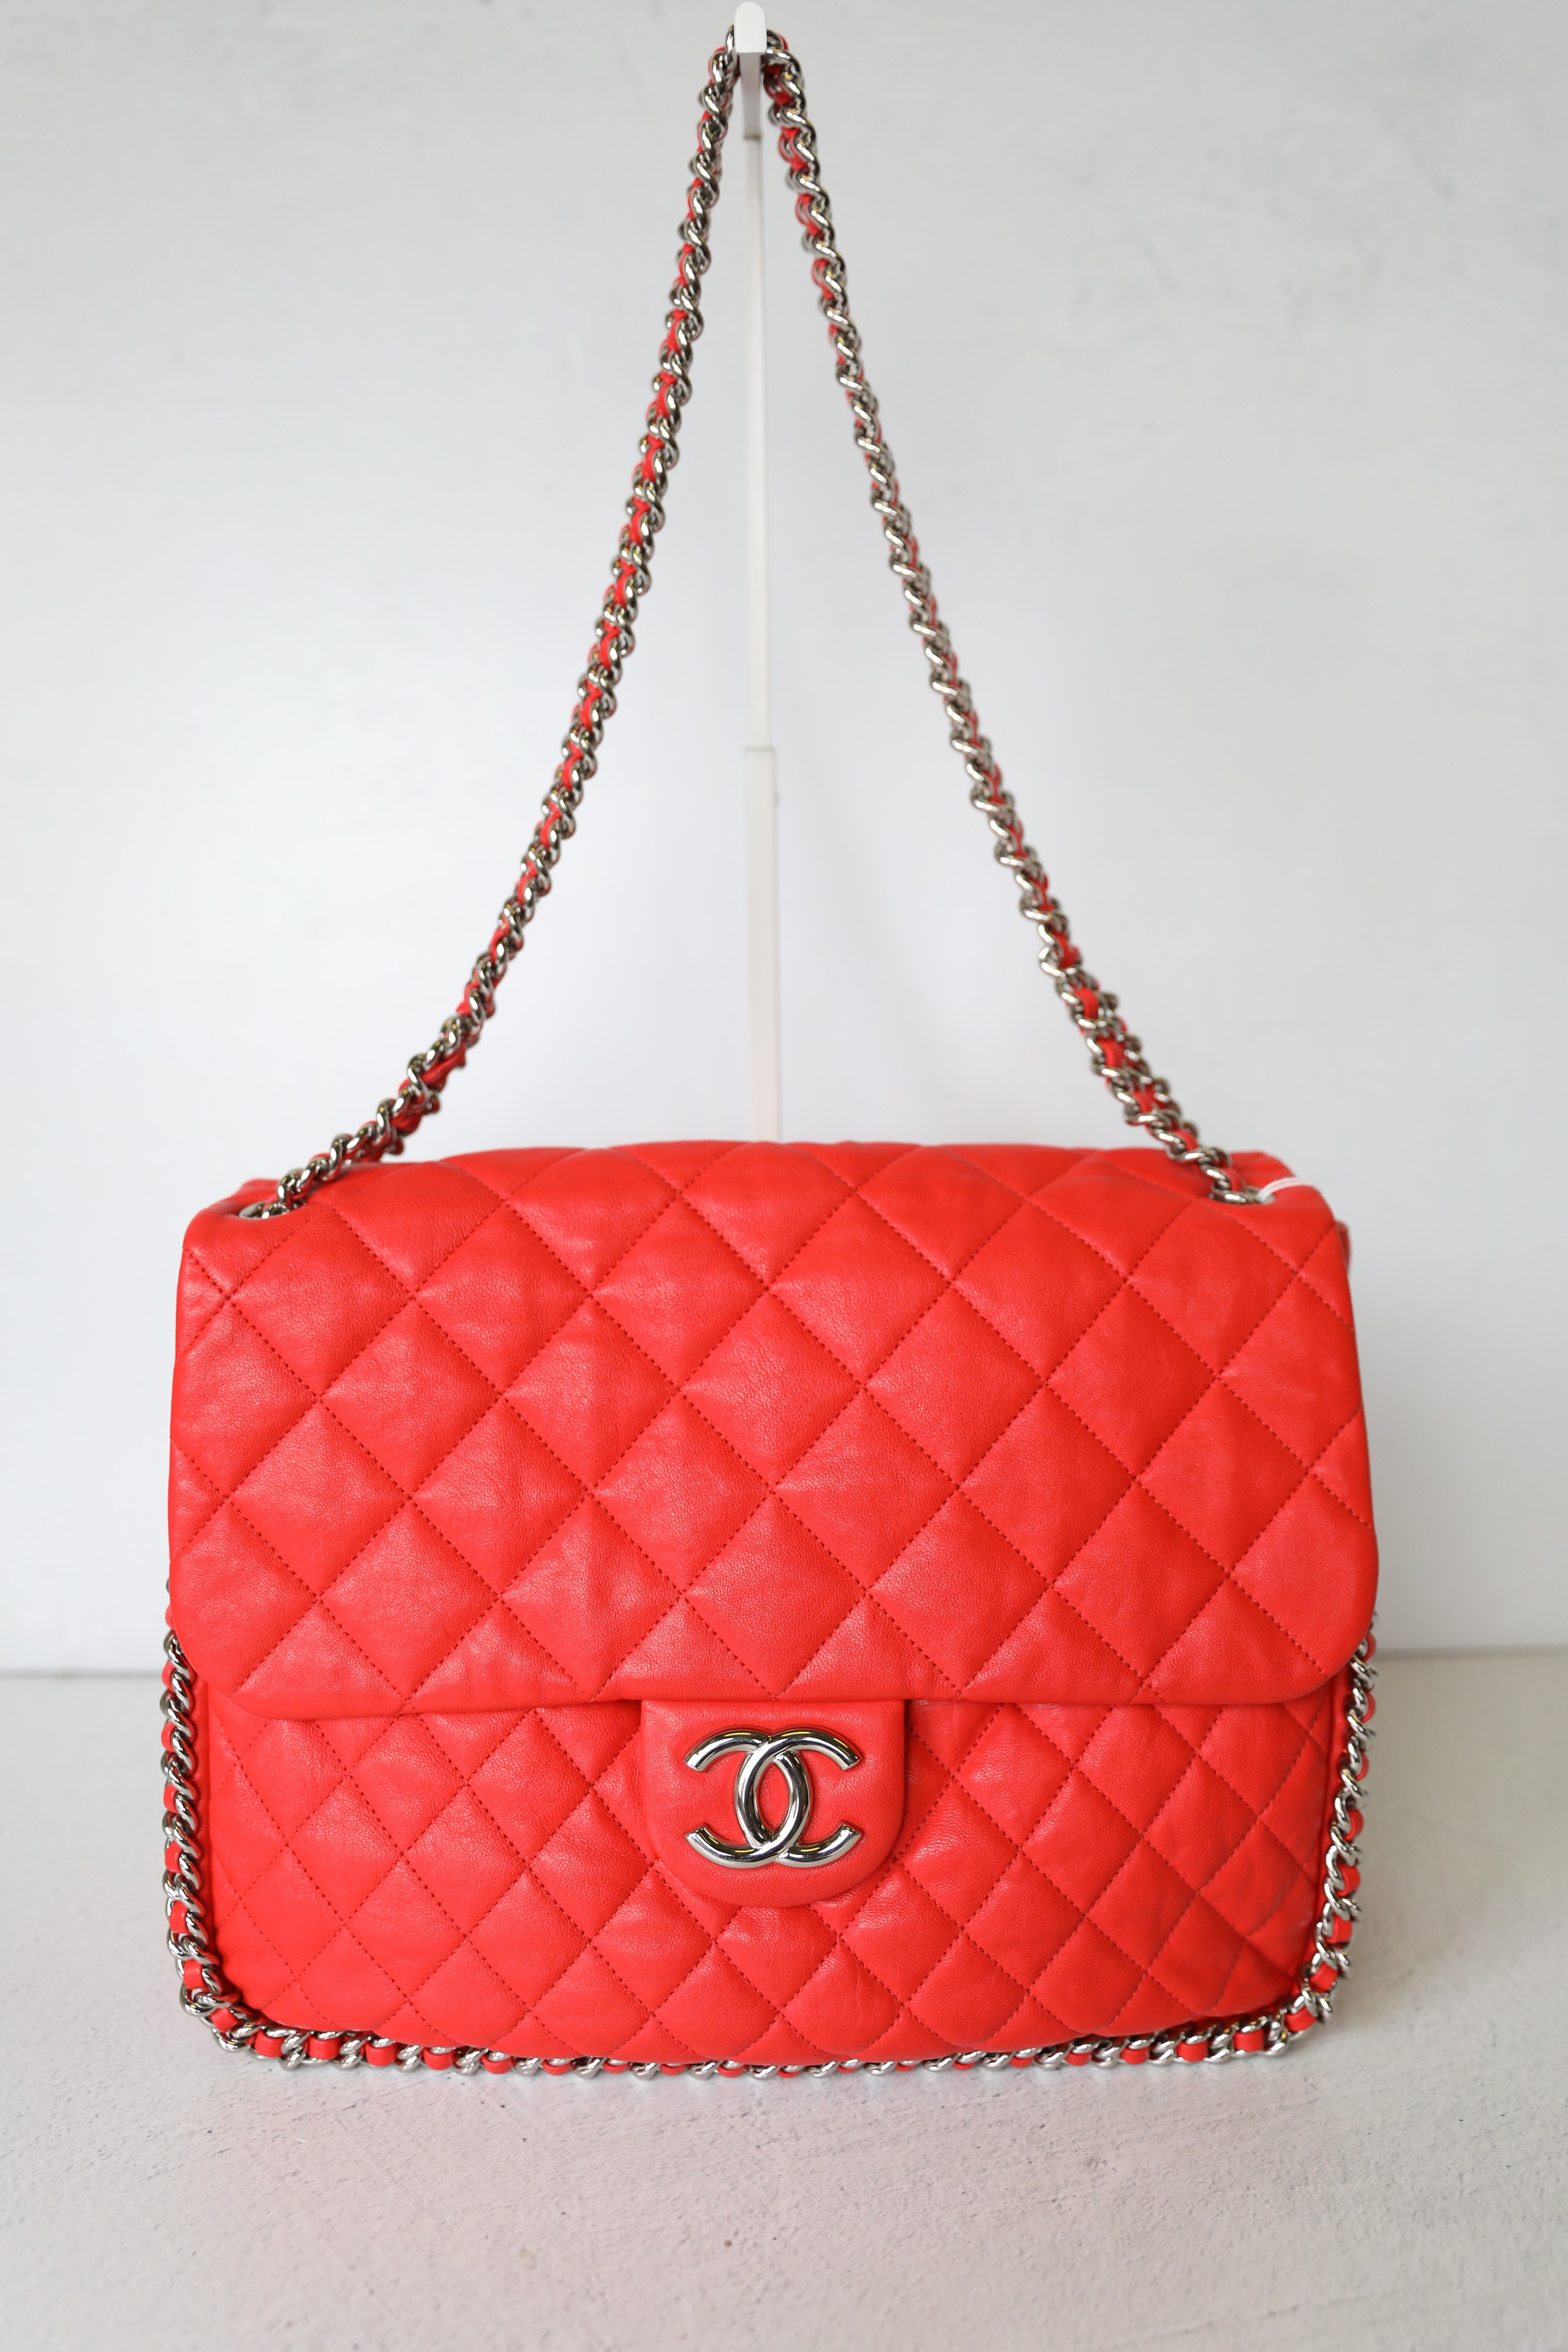 Chanel Chain Around Maxi Flap, Red Leather with Silver Hardware, Preowned  in Dustbag WA001